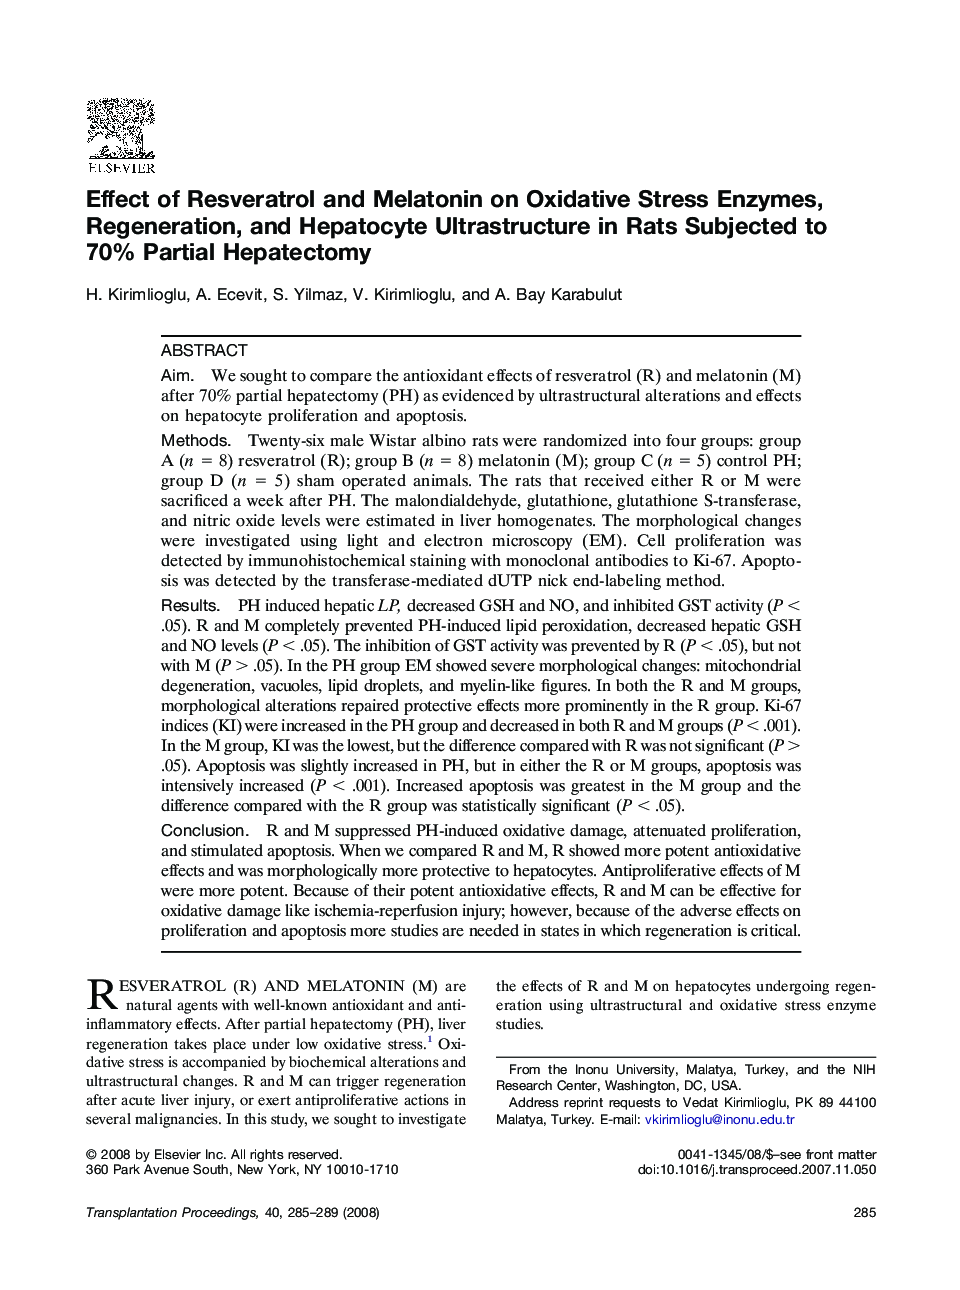 Effect of Resveratrol and Melatonin on Oxidative Stress Enzymes, Regeneration, and Hepatocyte Ultrastructure in Rats Subjected to 70% Partial Hepatectomy